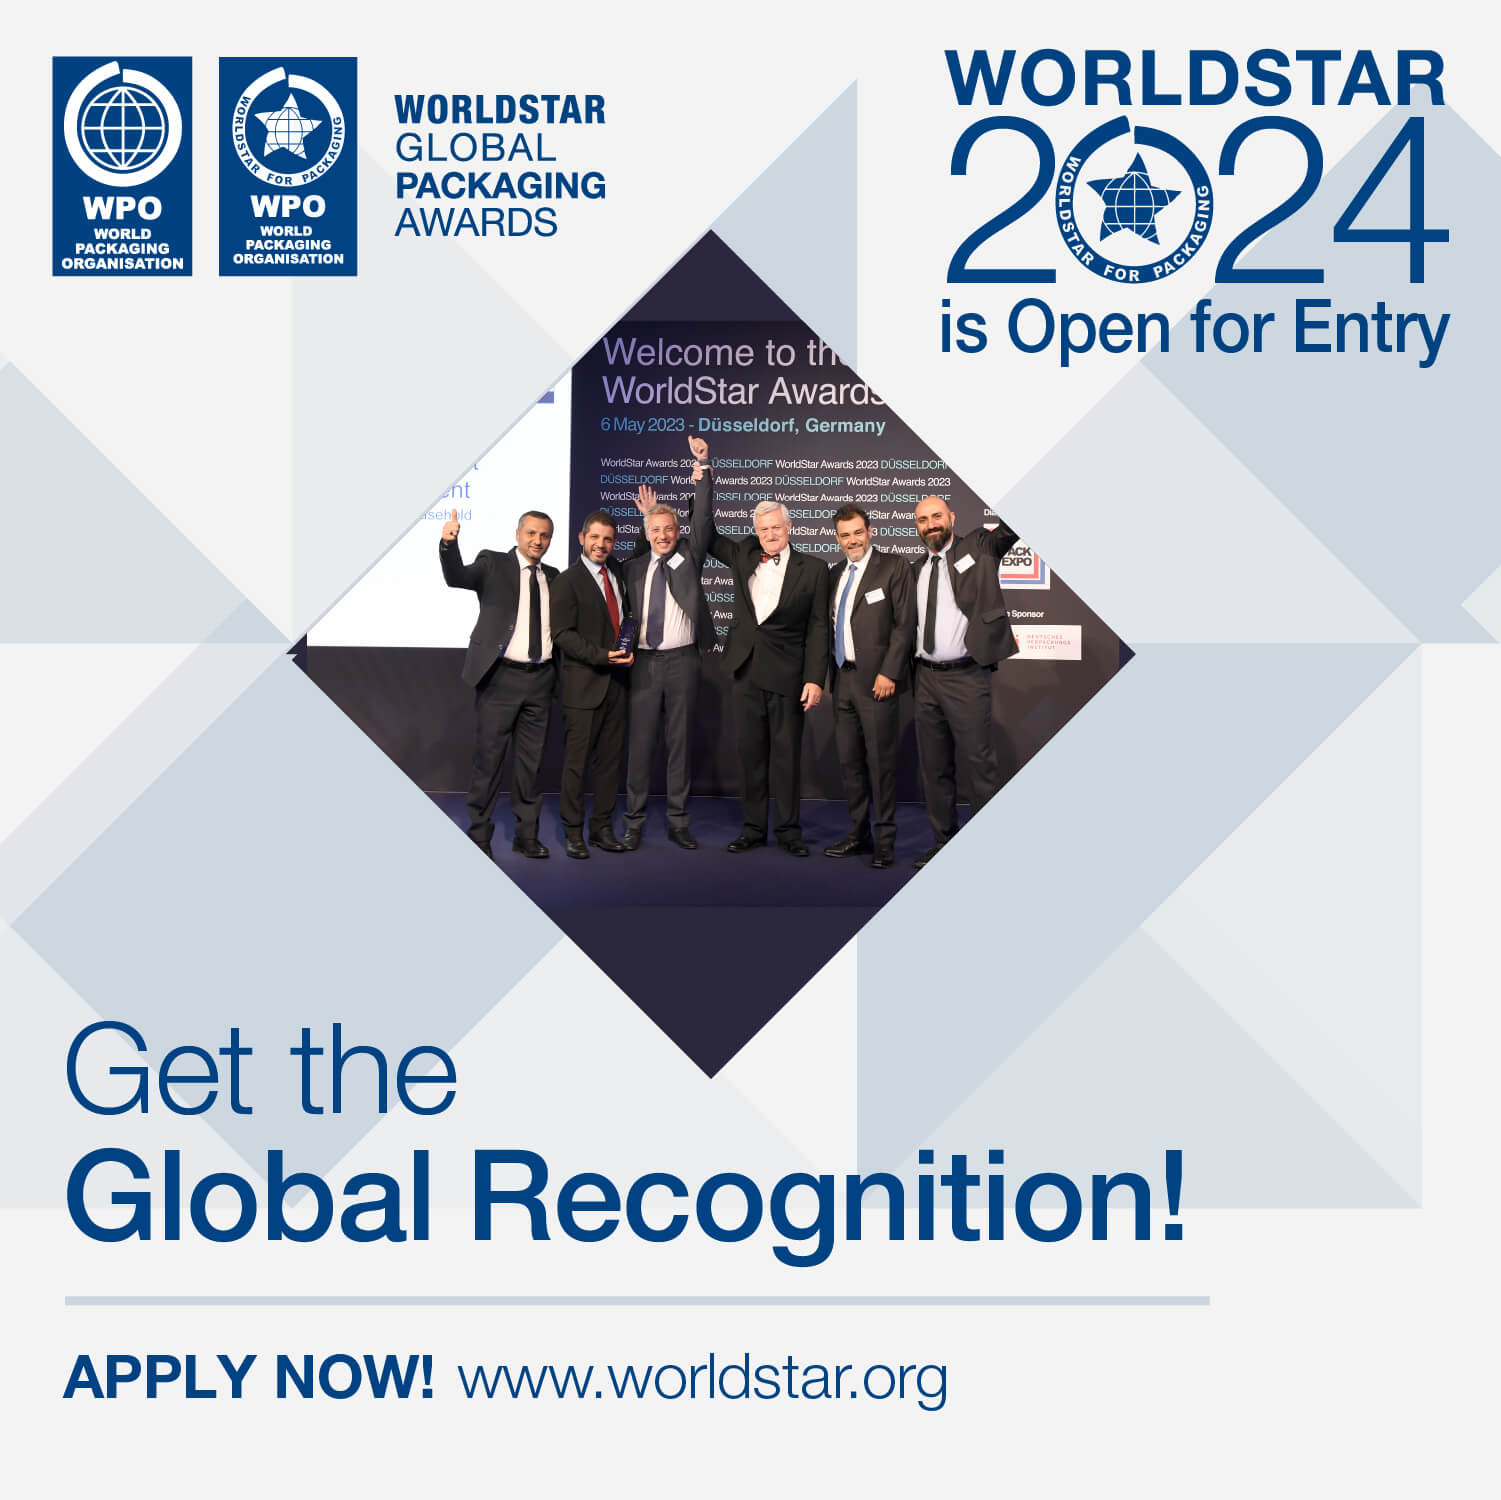 📢 We are thrilled to announce that the entry for WorldStar Awards 2024 is now open!